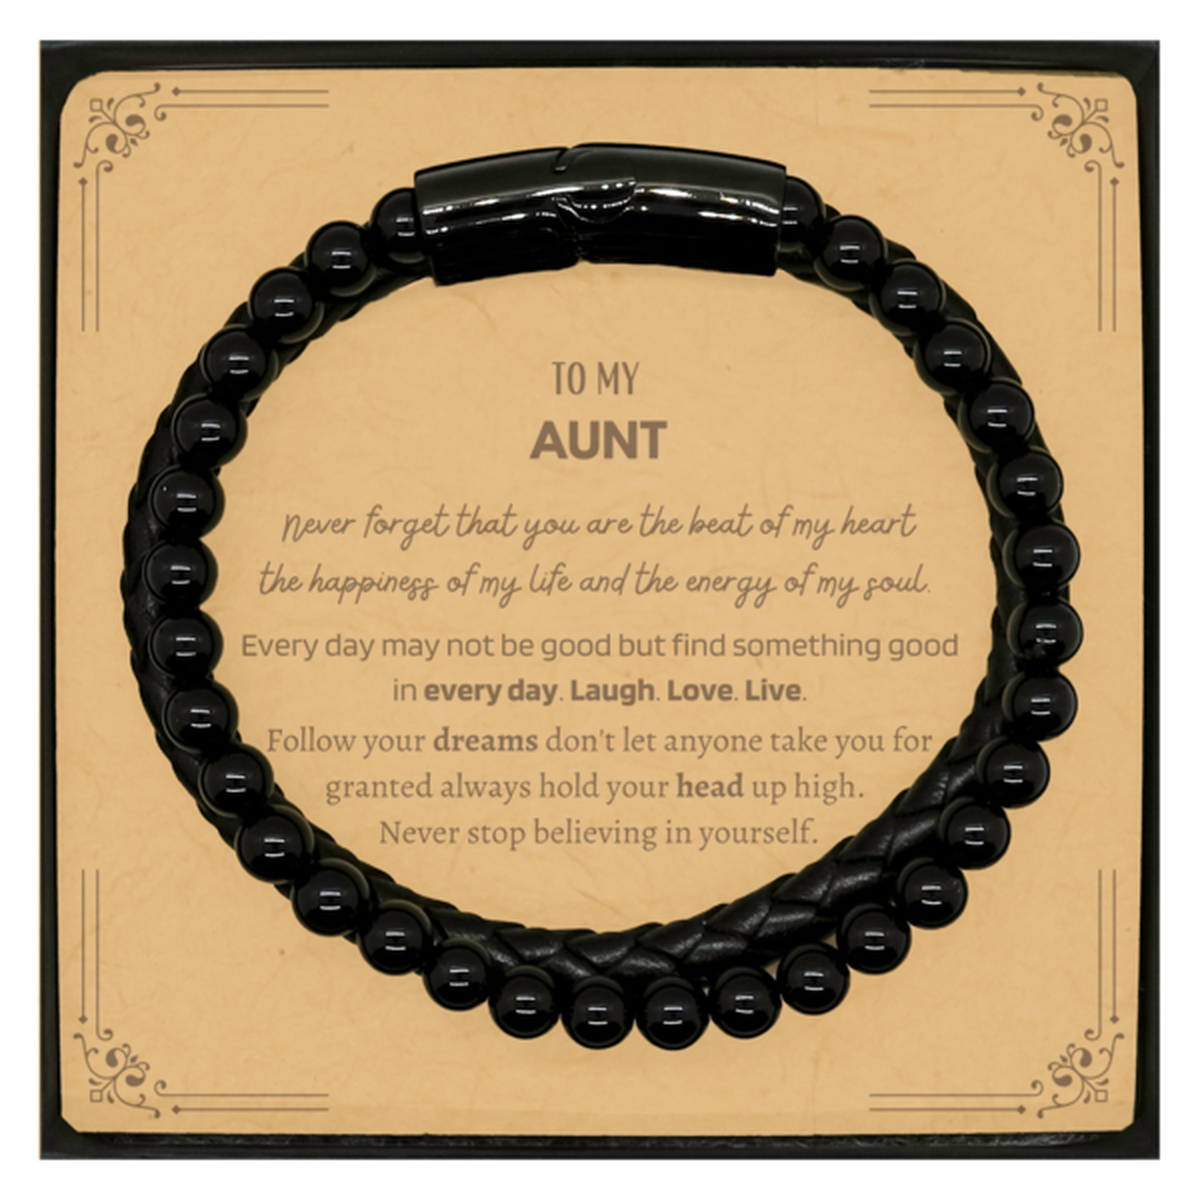 To My Aunt Message Card Gifts, Christmas Aunt Stone Leather Bracelets Present, Birthday Unique Motivational For Aunt, To My Aunt Never forget that you are the beat of my heart the happiness of my life and the energy of my soul